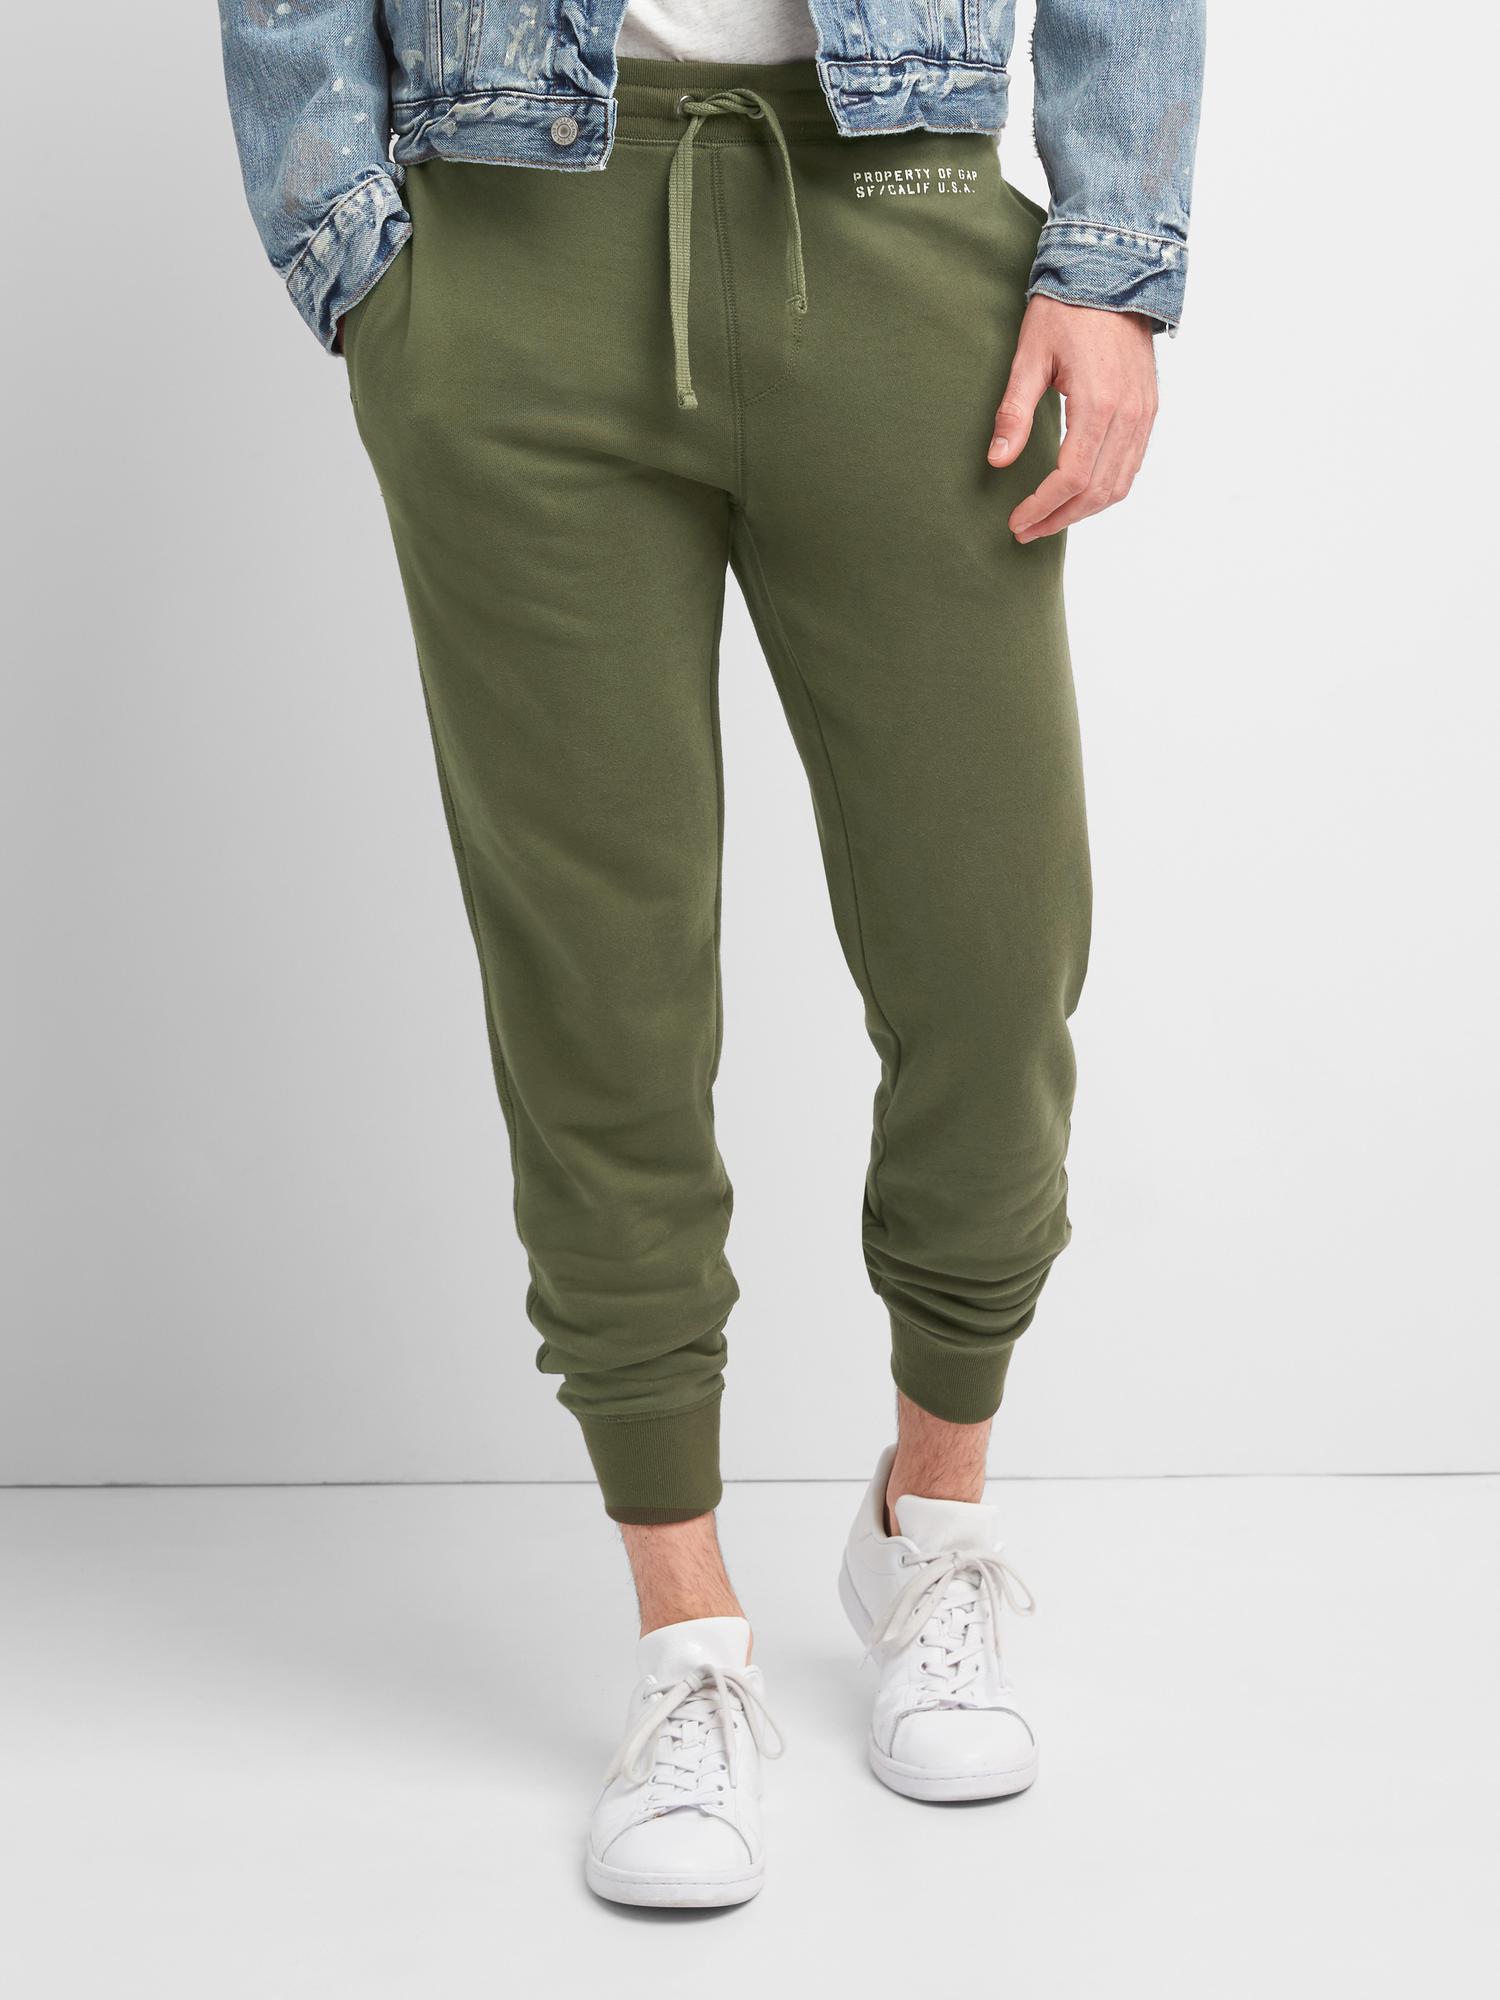 French Terry Joggers | Gap